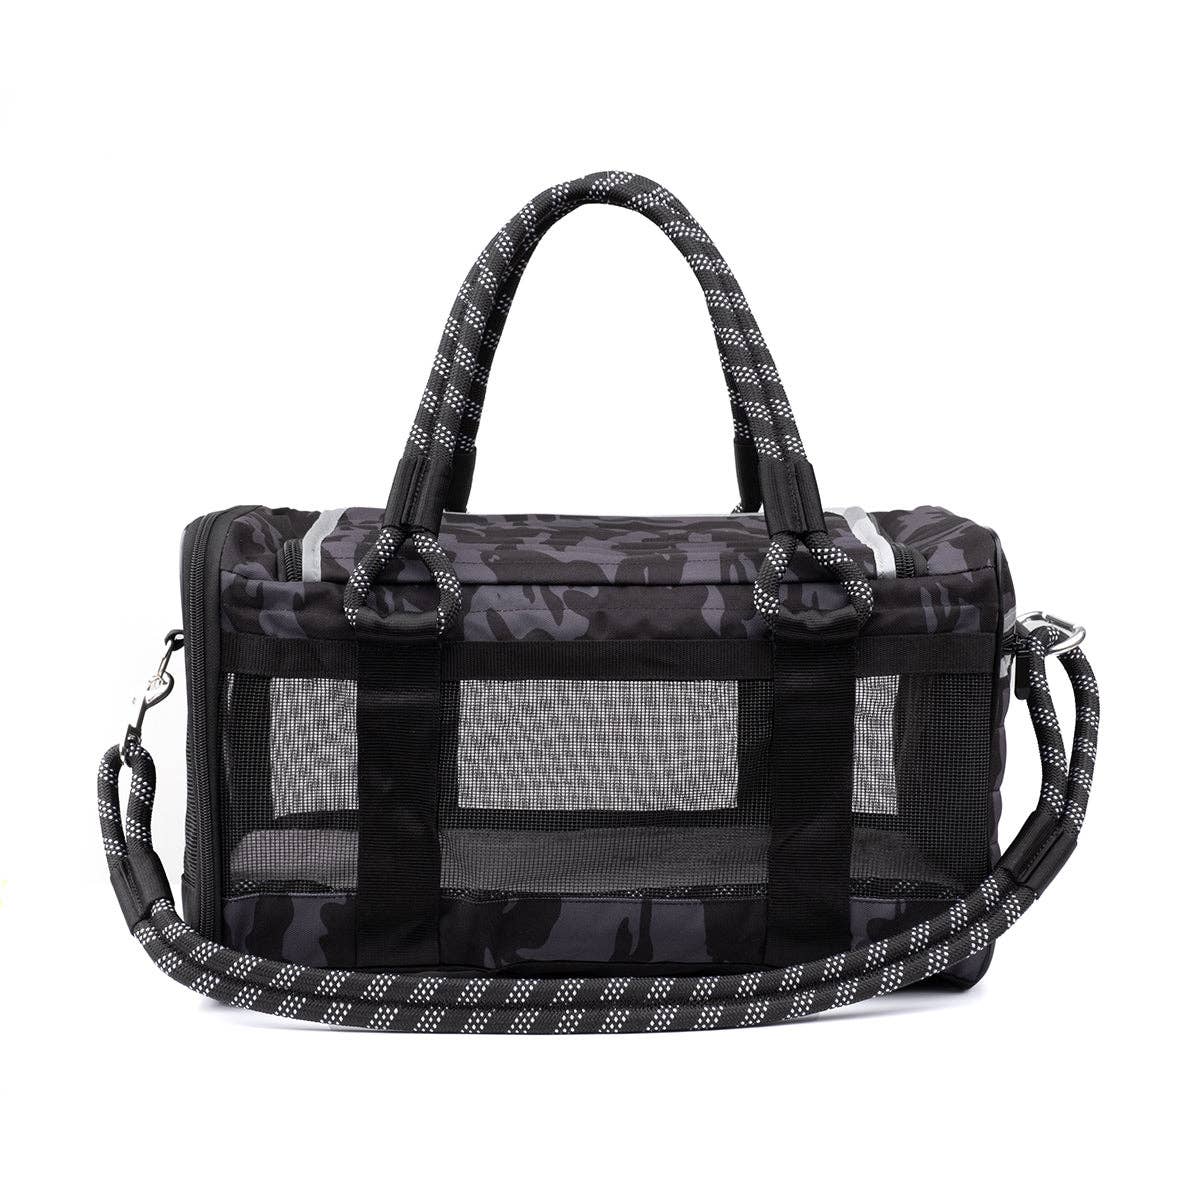 Load image into Gallery viewer, Roverlund Out-of-Office Pet Carrier Black Camo Image
